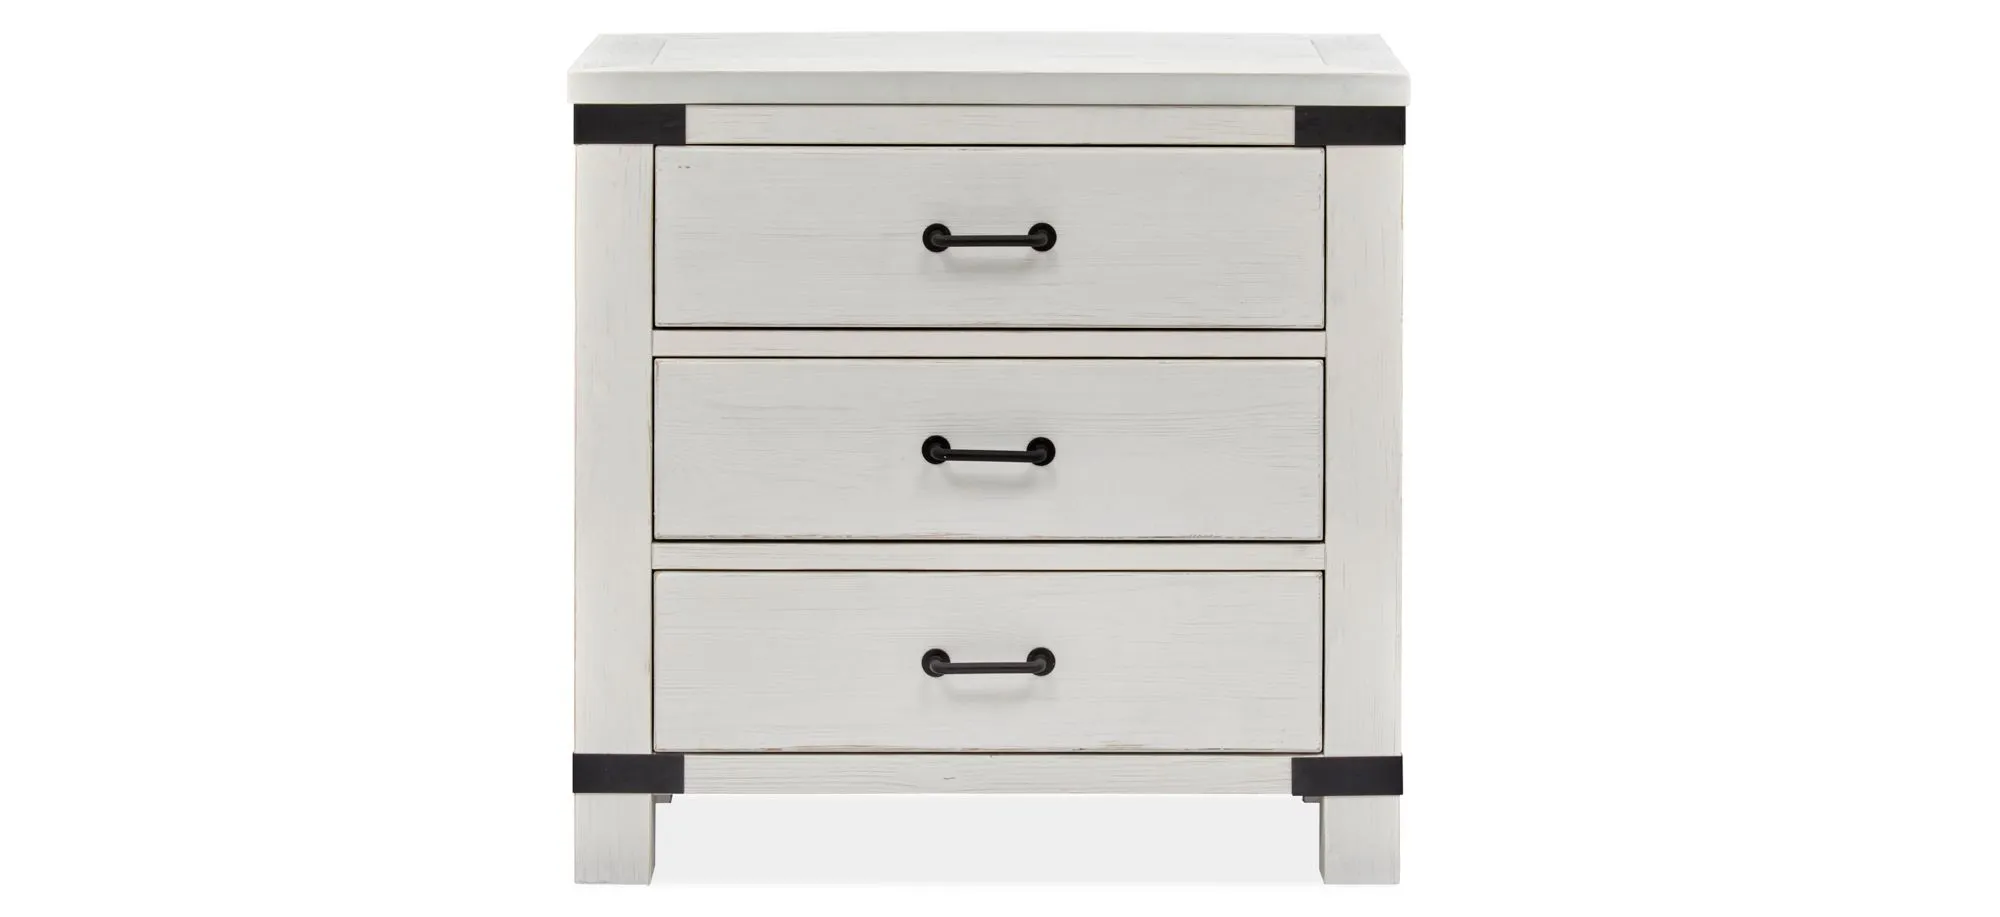 Harper Springs Nightstand w/Metal Accent in Silo White by Magnussen Home